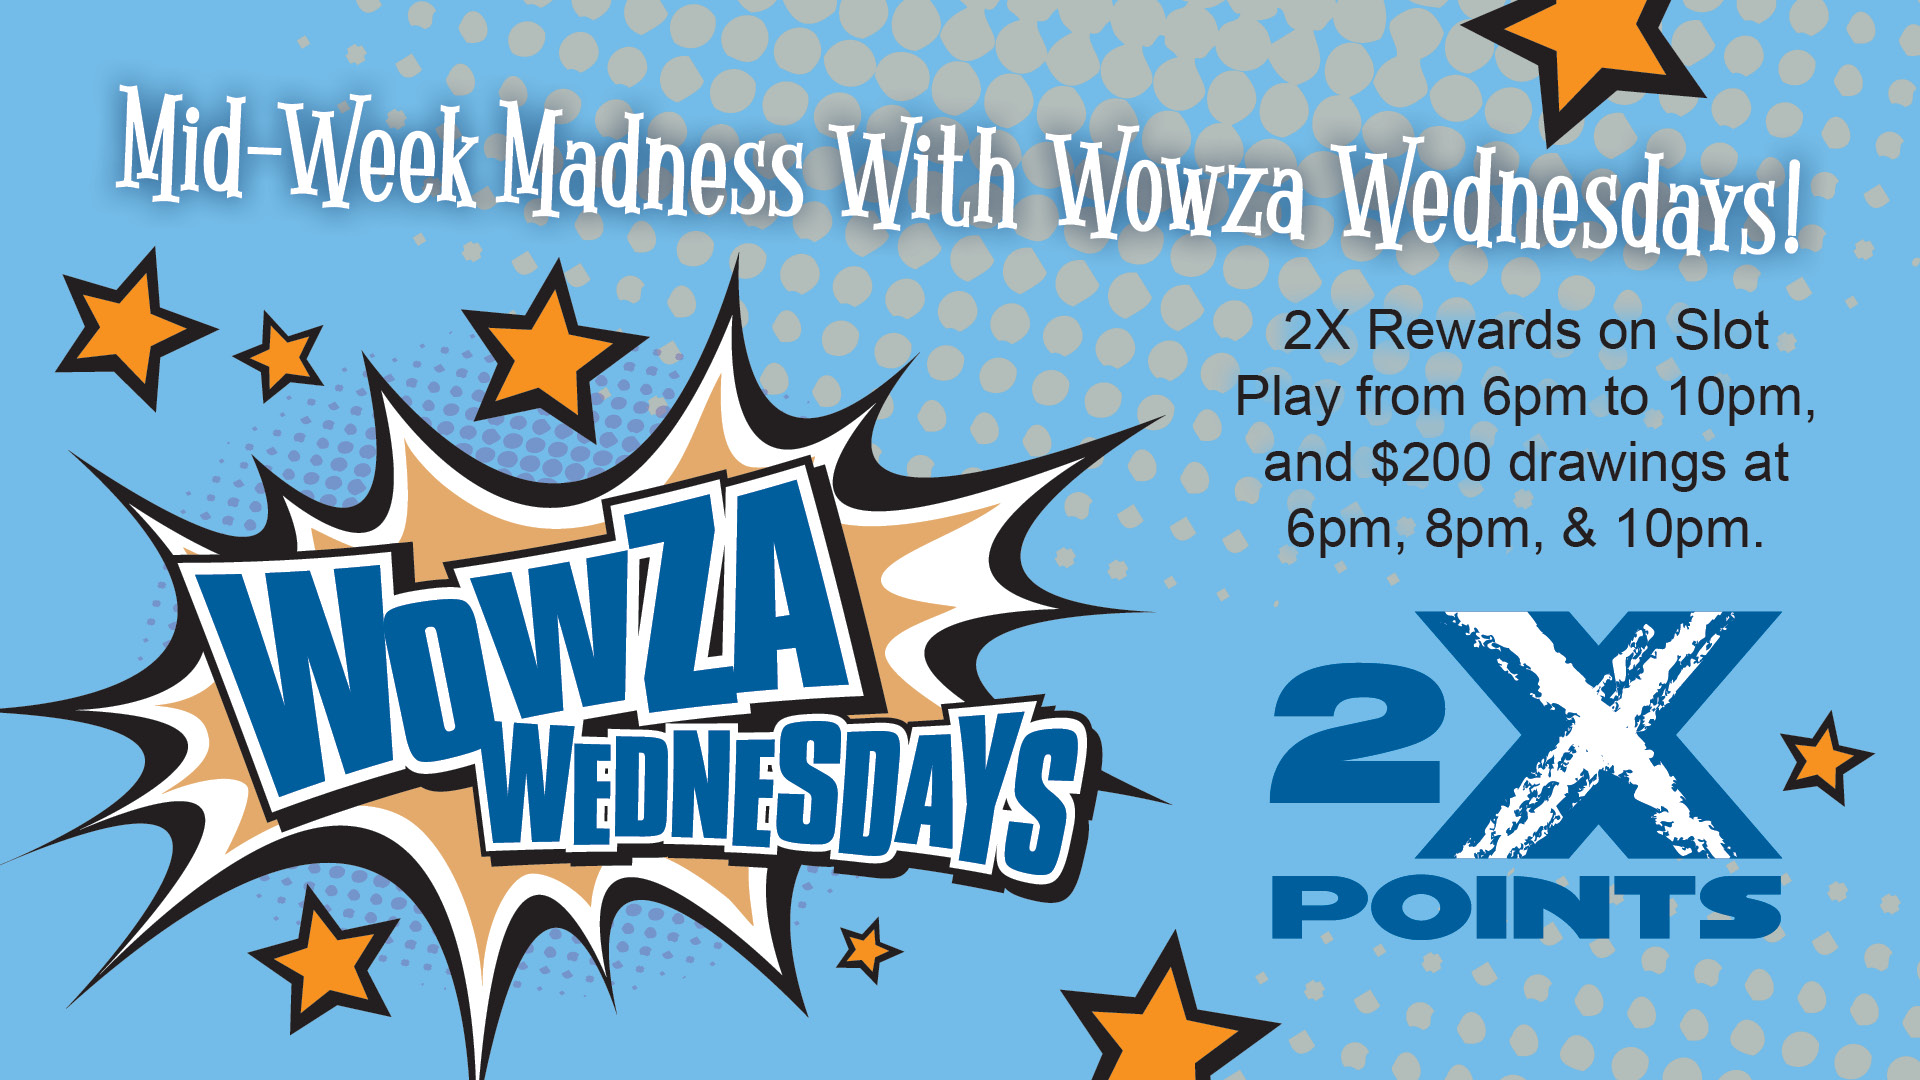 2X Points & $200 Drawings on Wednesdays